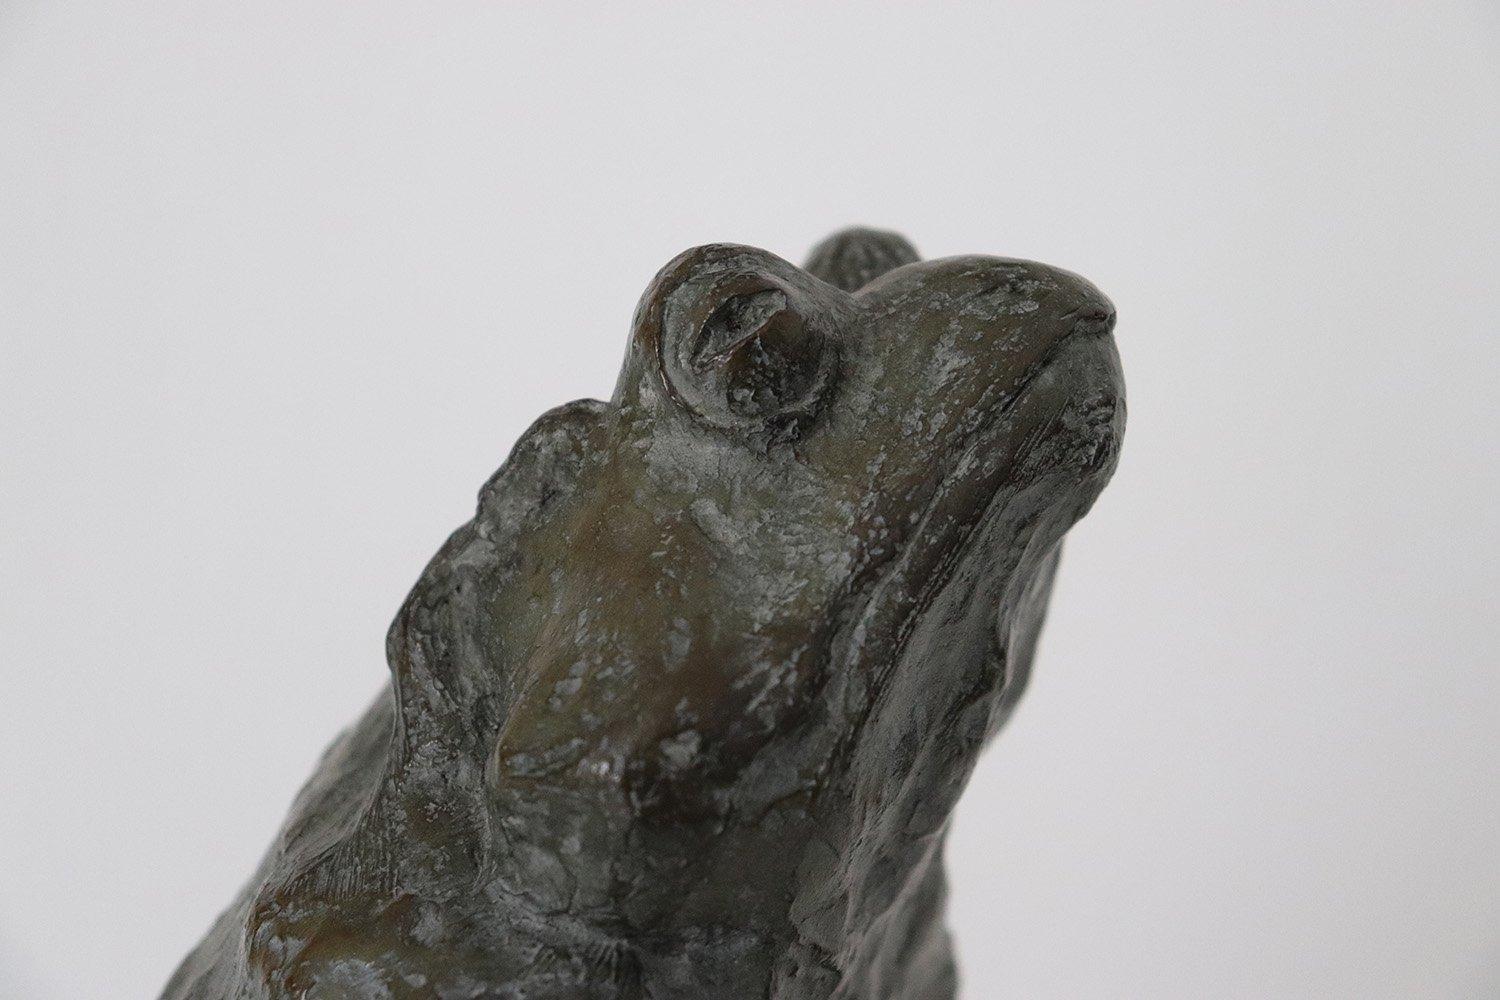 Magic Frog by Chésade - Bronze sculpture, animal art, expressionism, realism For Sale 6